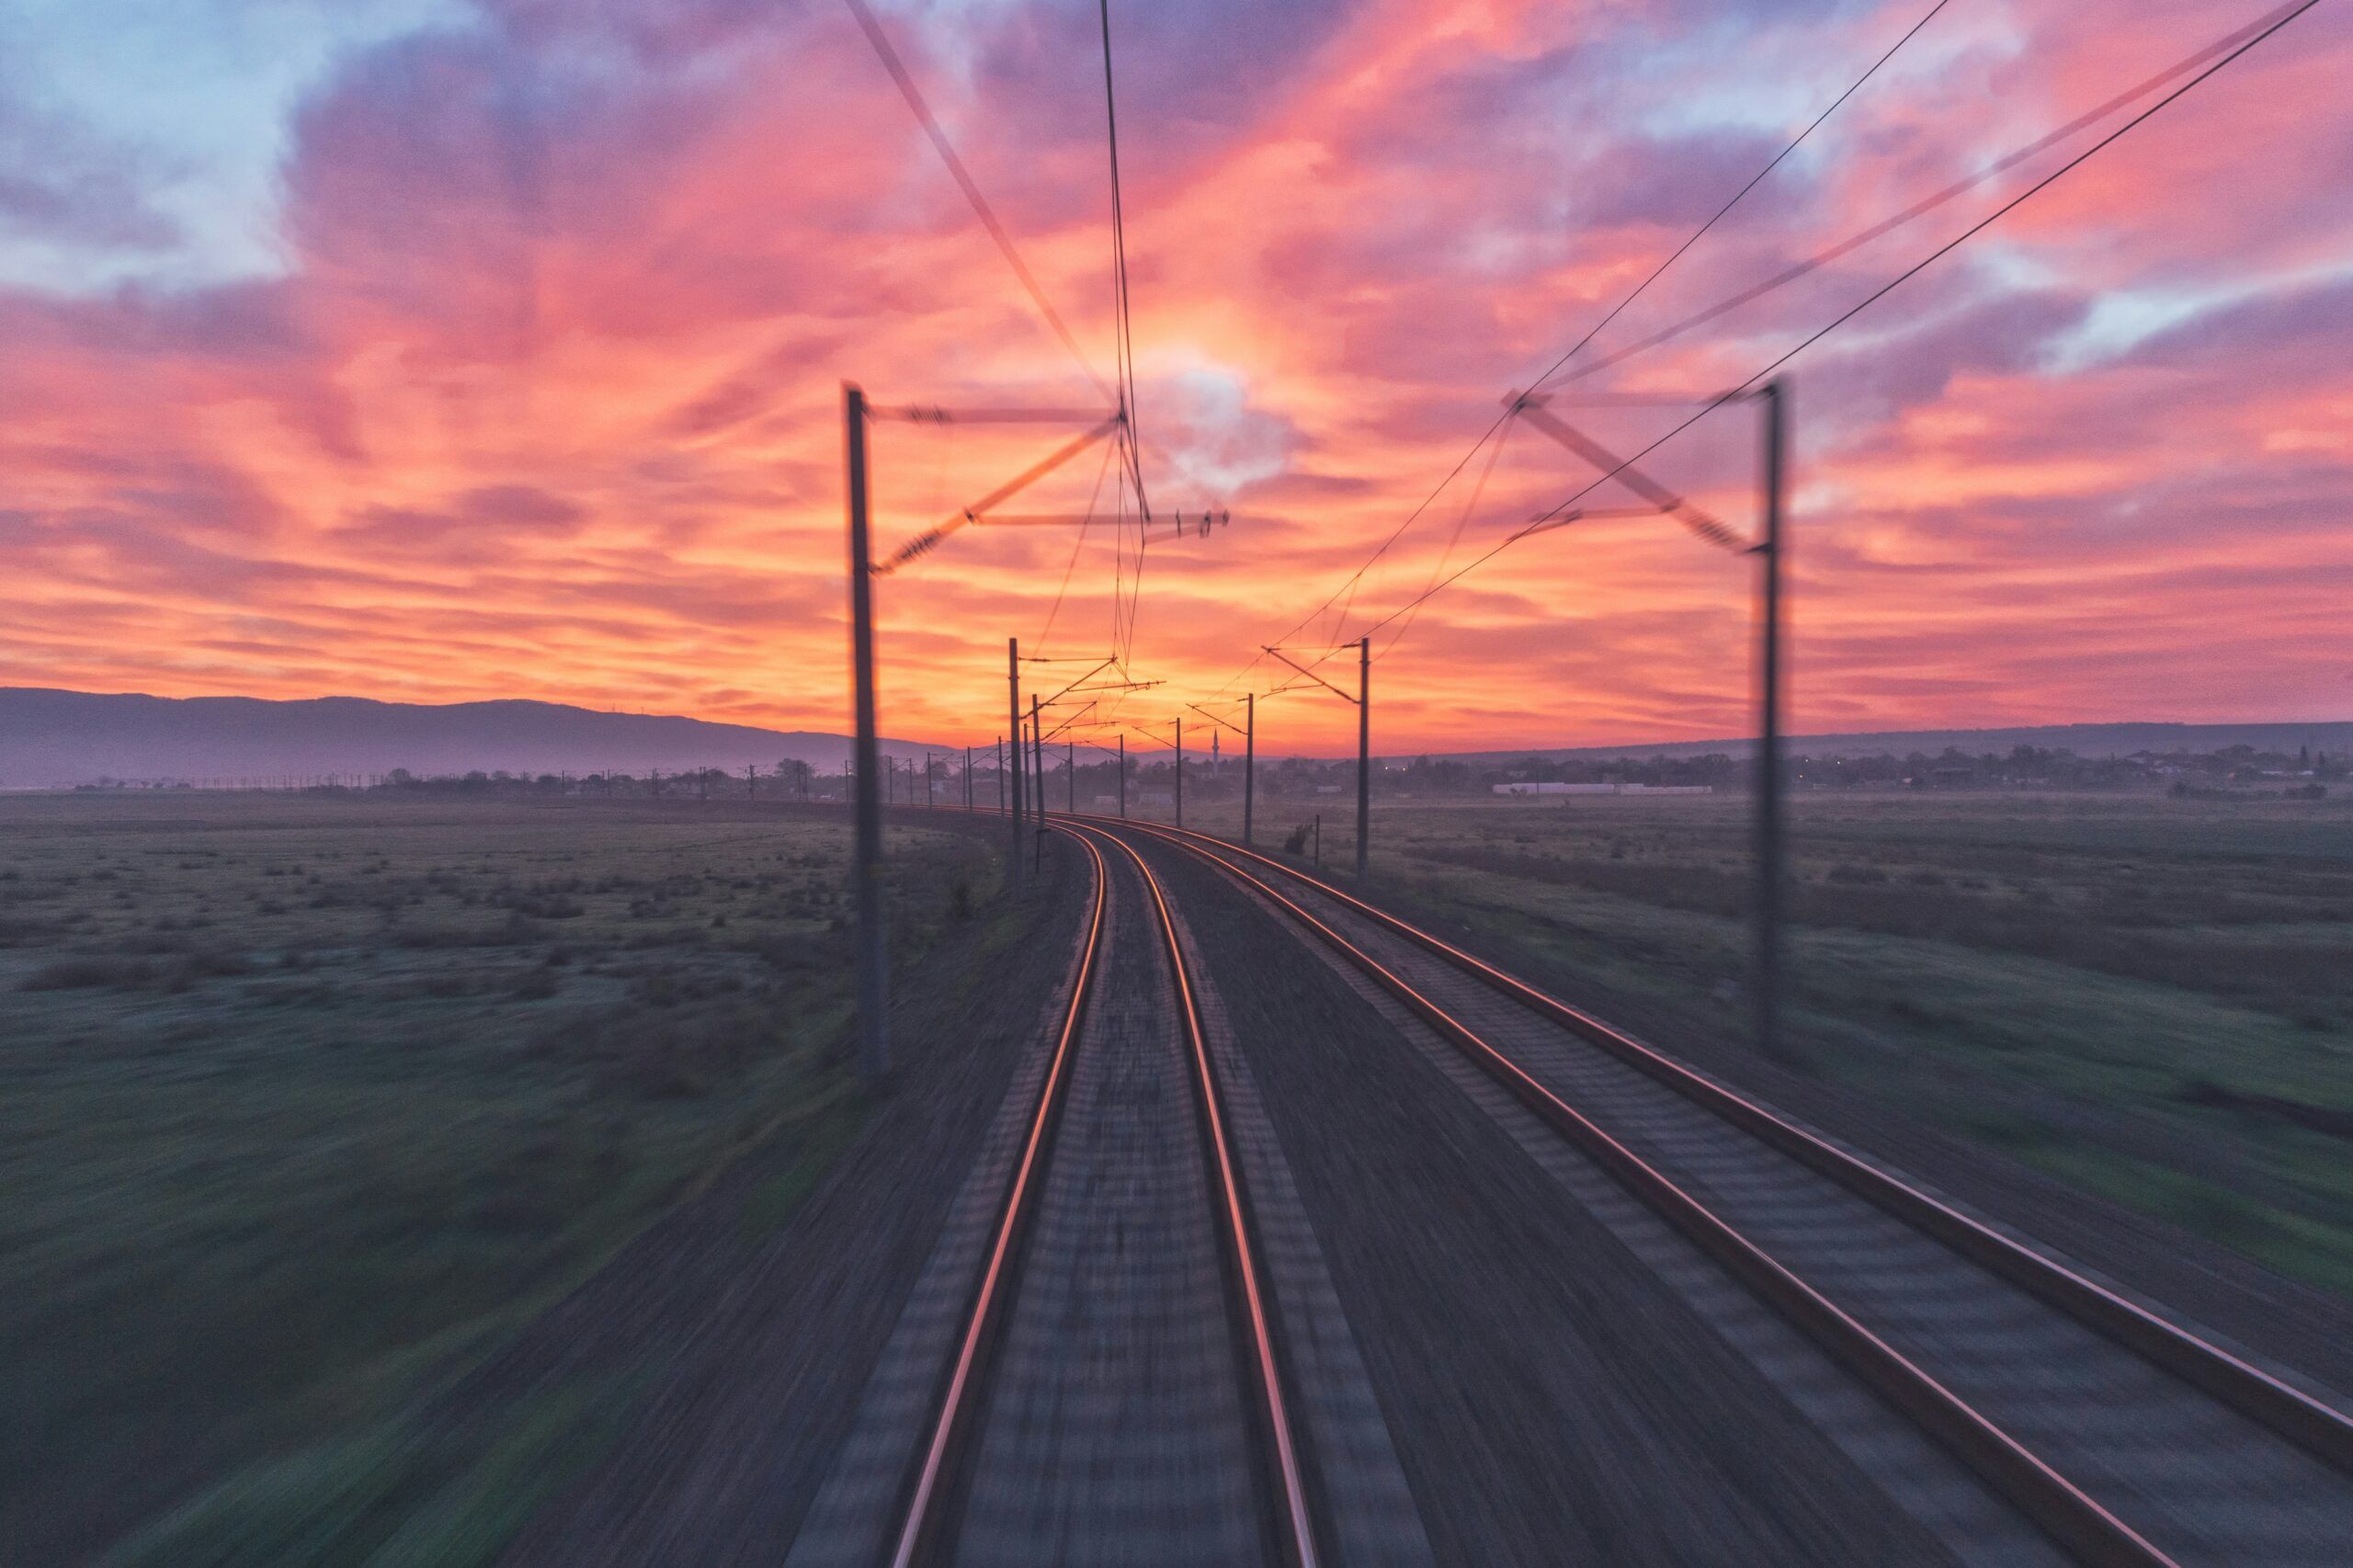 On board a train that zooms into the sunrise.